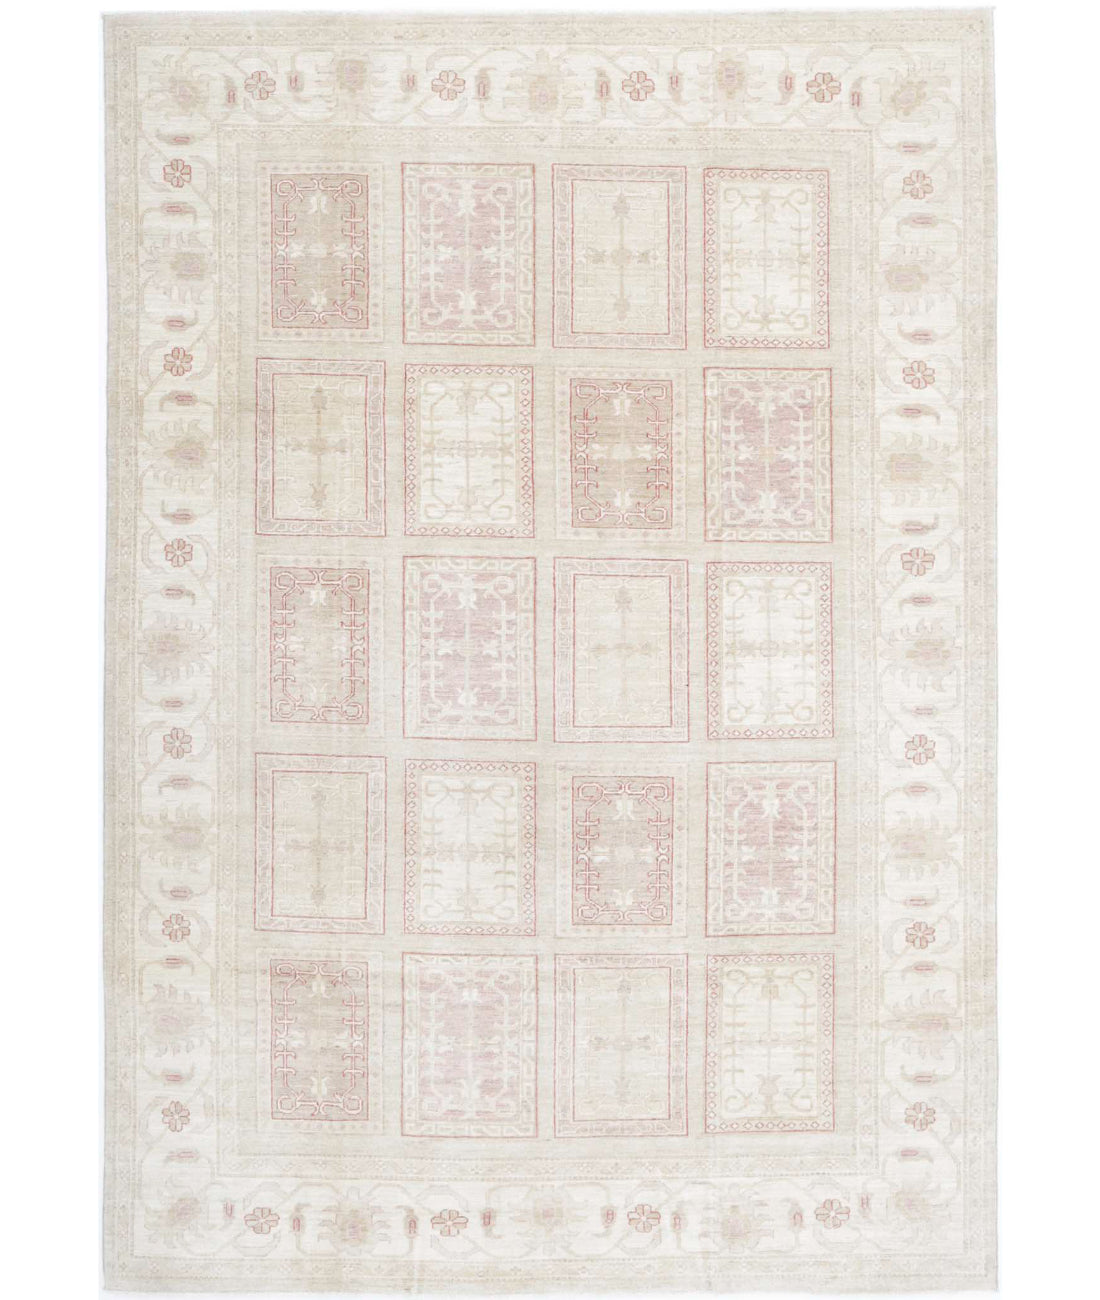 Hand Knotted Bakhtiari Wool Rug - 6'4'' x 9'3'' 6'4'' x 9'3'' (190 X 278) / Taupe / Ivory